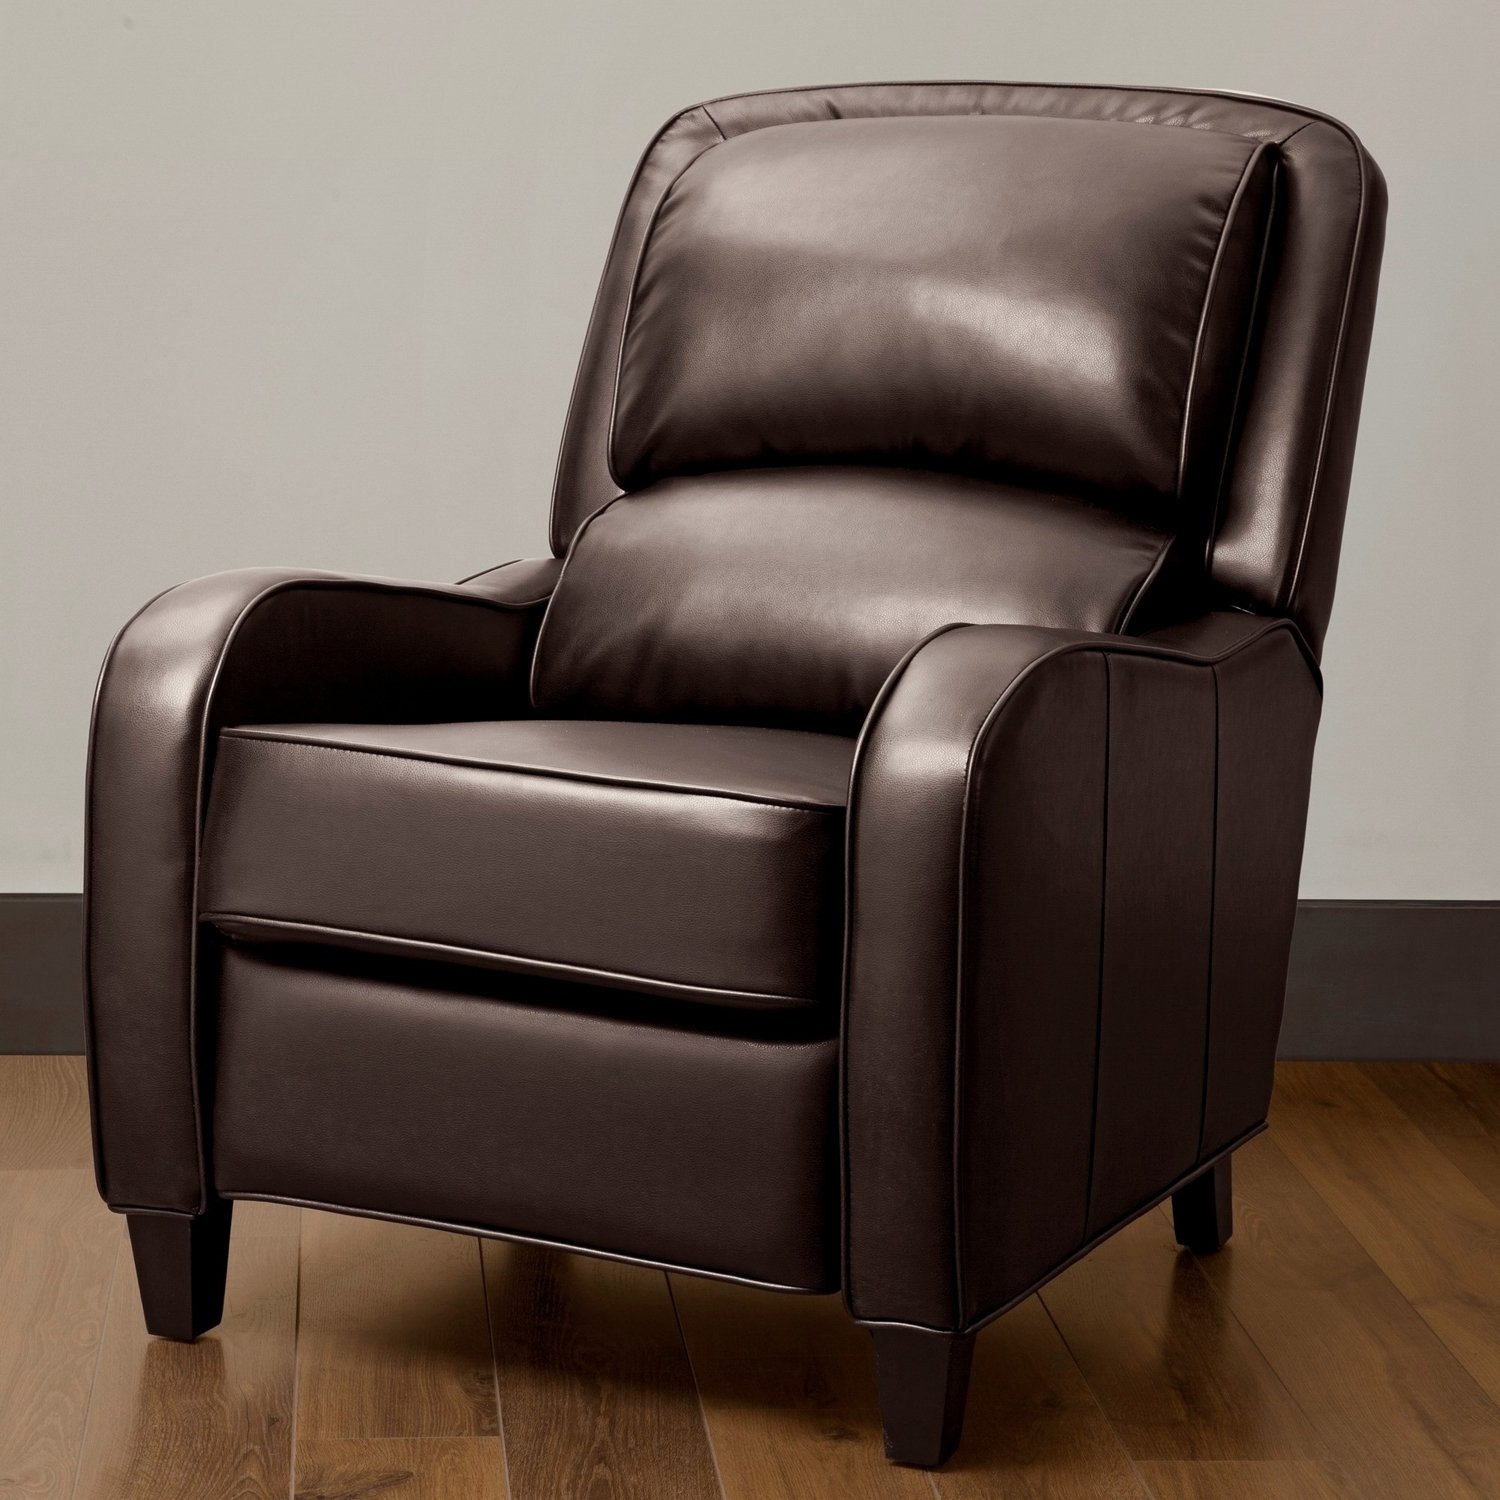 Recliners For Small Spaces Visualhunt, Narrow Leather Recliner